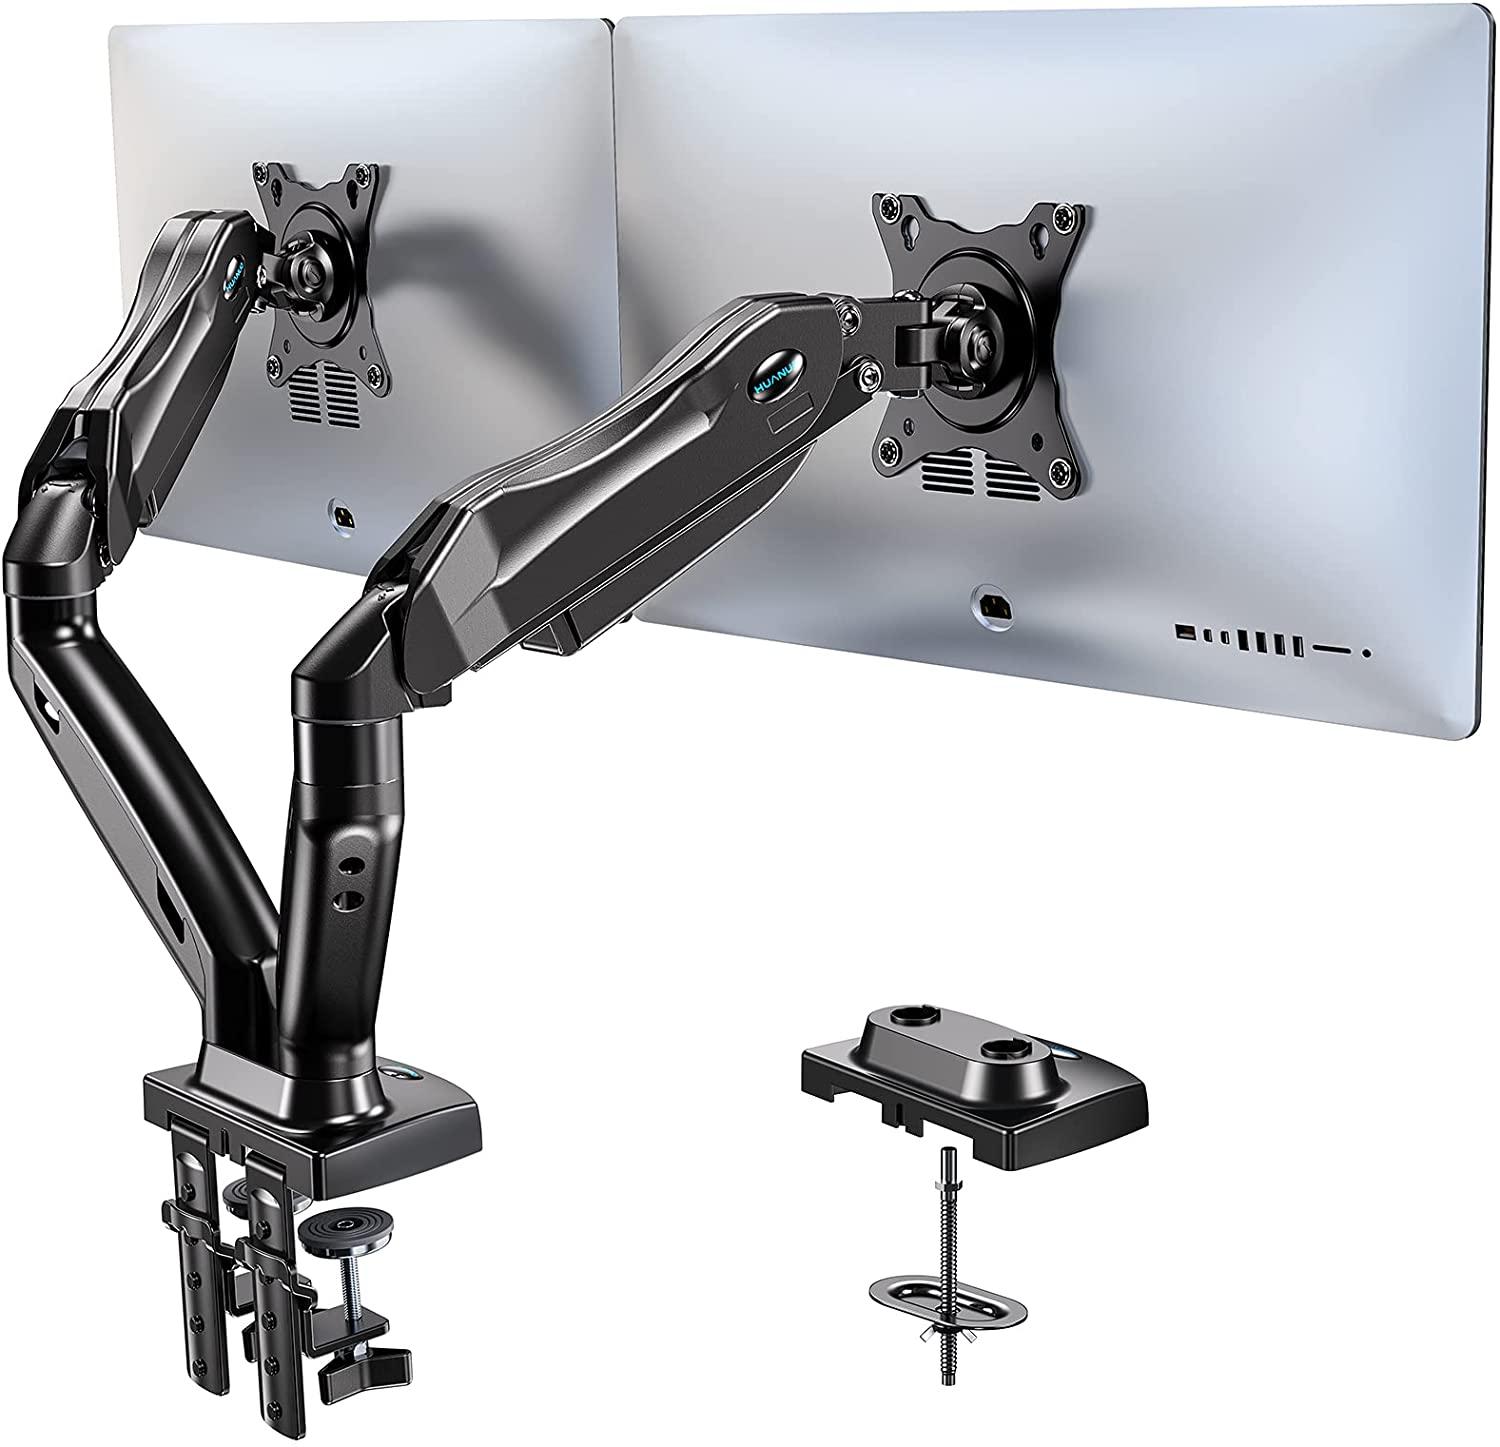 Dual Monitor Adjustable Spring Stand Monitor Mount for $33.99 Shipped